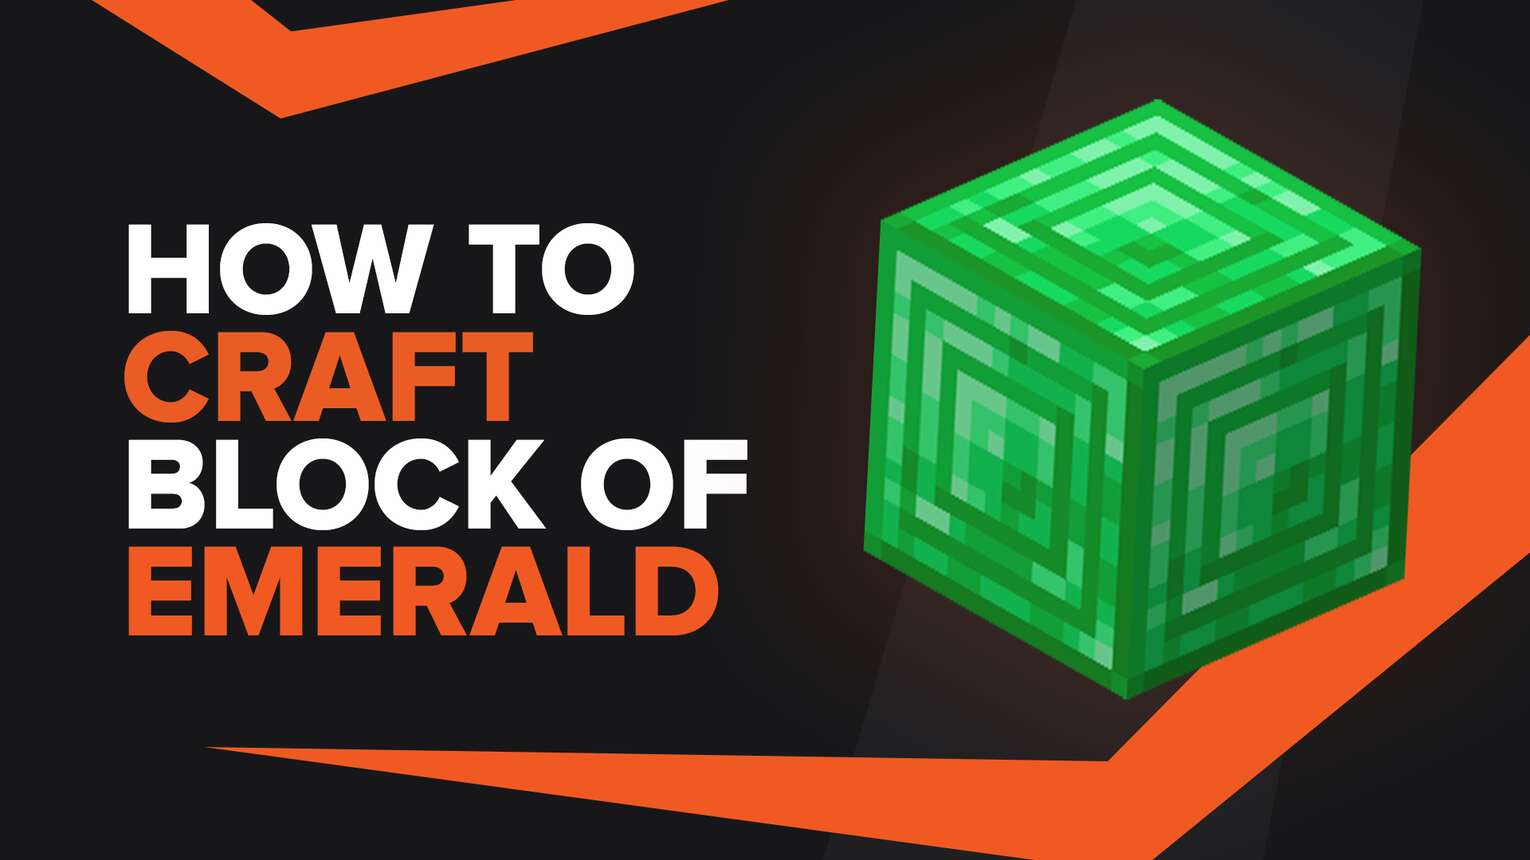 How To Make Block Of Emerald In Minecraft